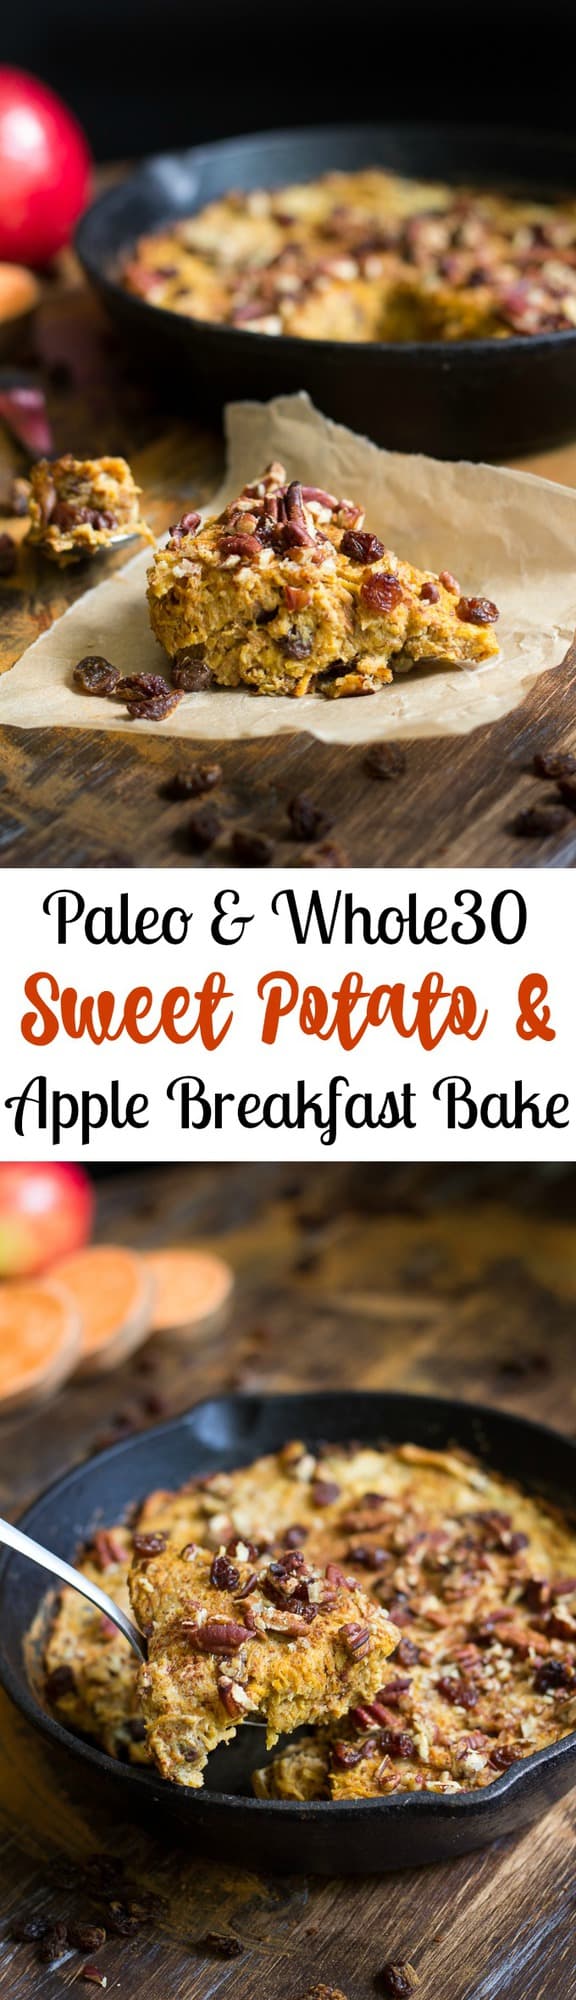 Paleo and Whole30 sweet potato apple breakfast bake that's a naturally sweet, simple, comforting and healthy one-skillet breakfast